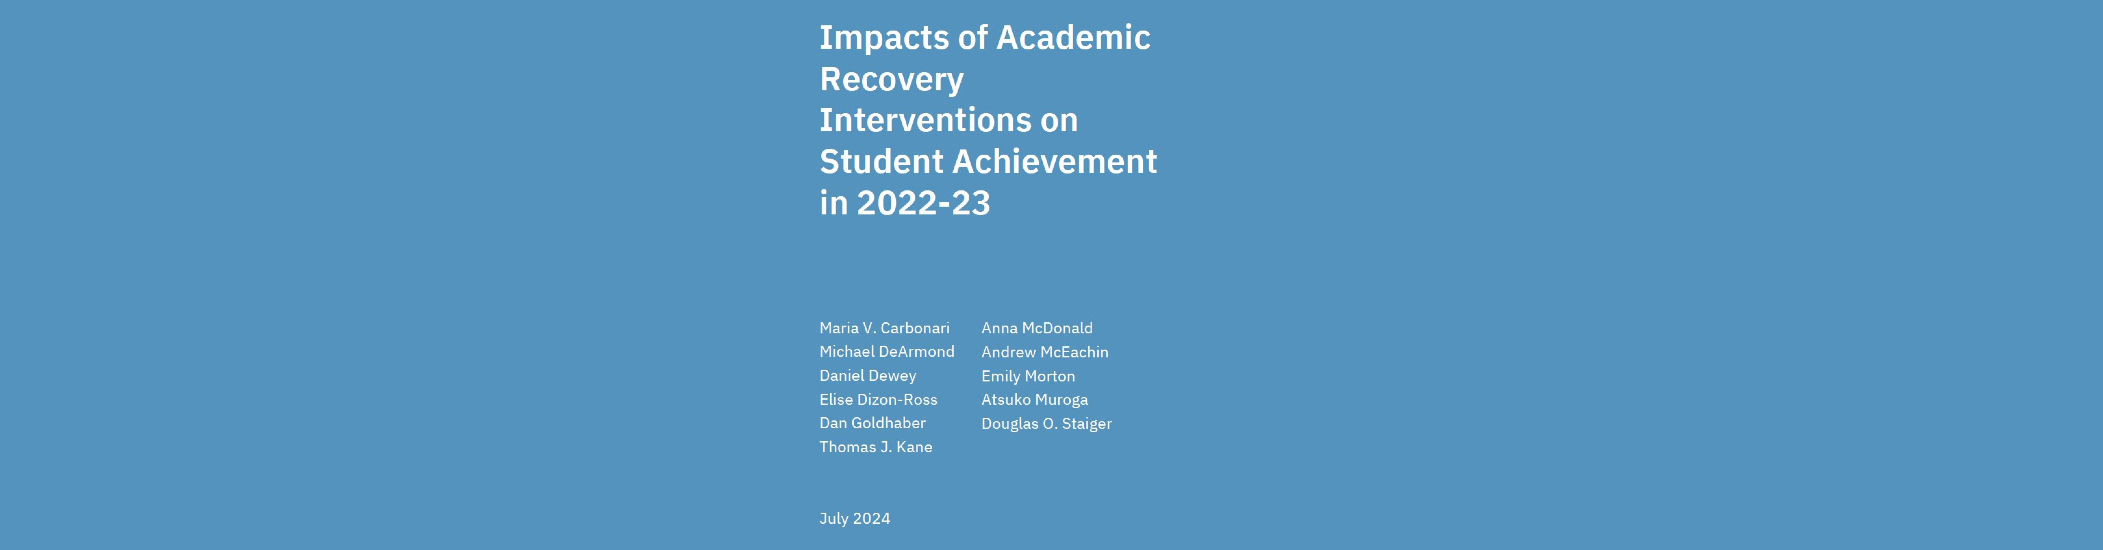 Impacts of Academic Recovery Interventions on Student Achievement in 2022-23